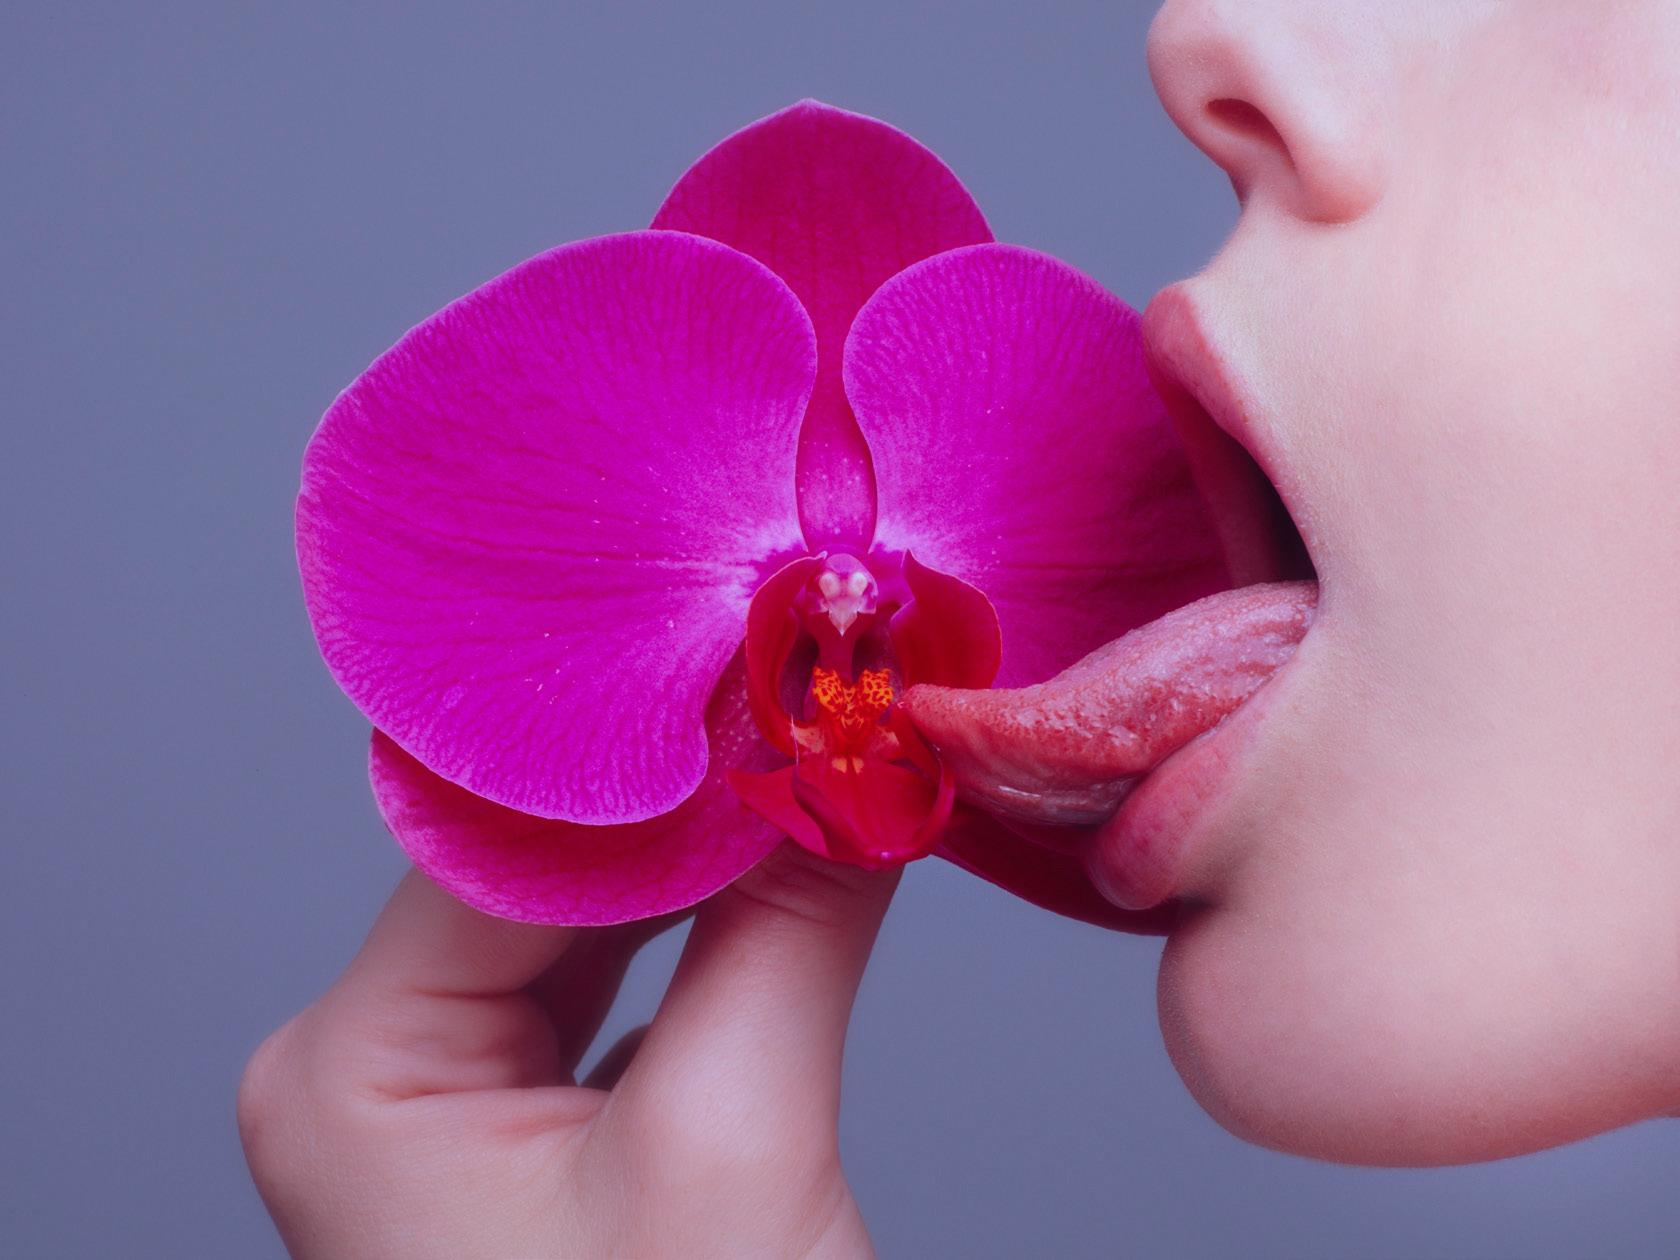 Tyler Shields - Orchid, Photography 2019, Printed After